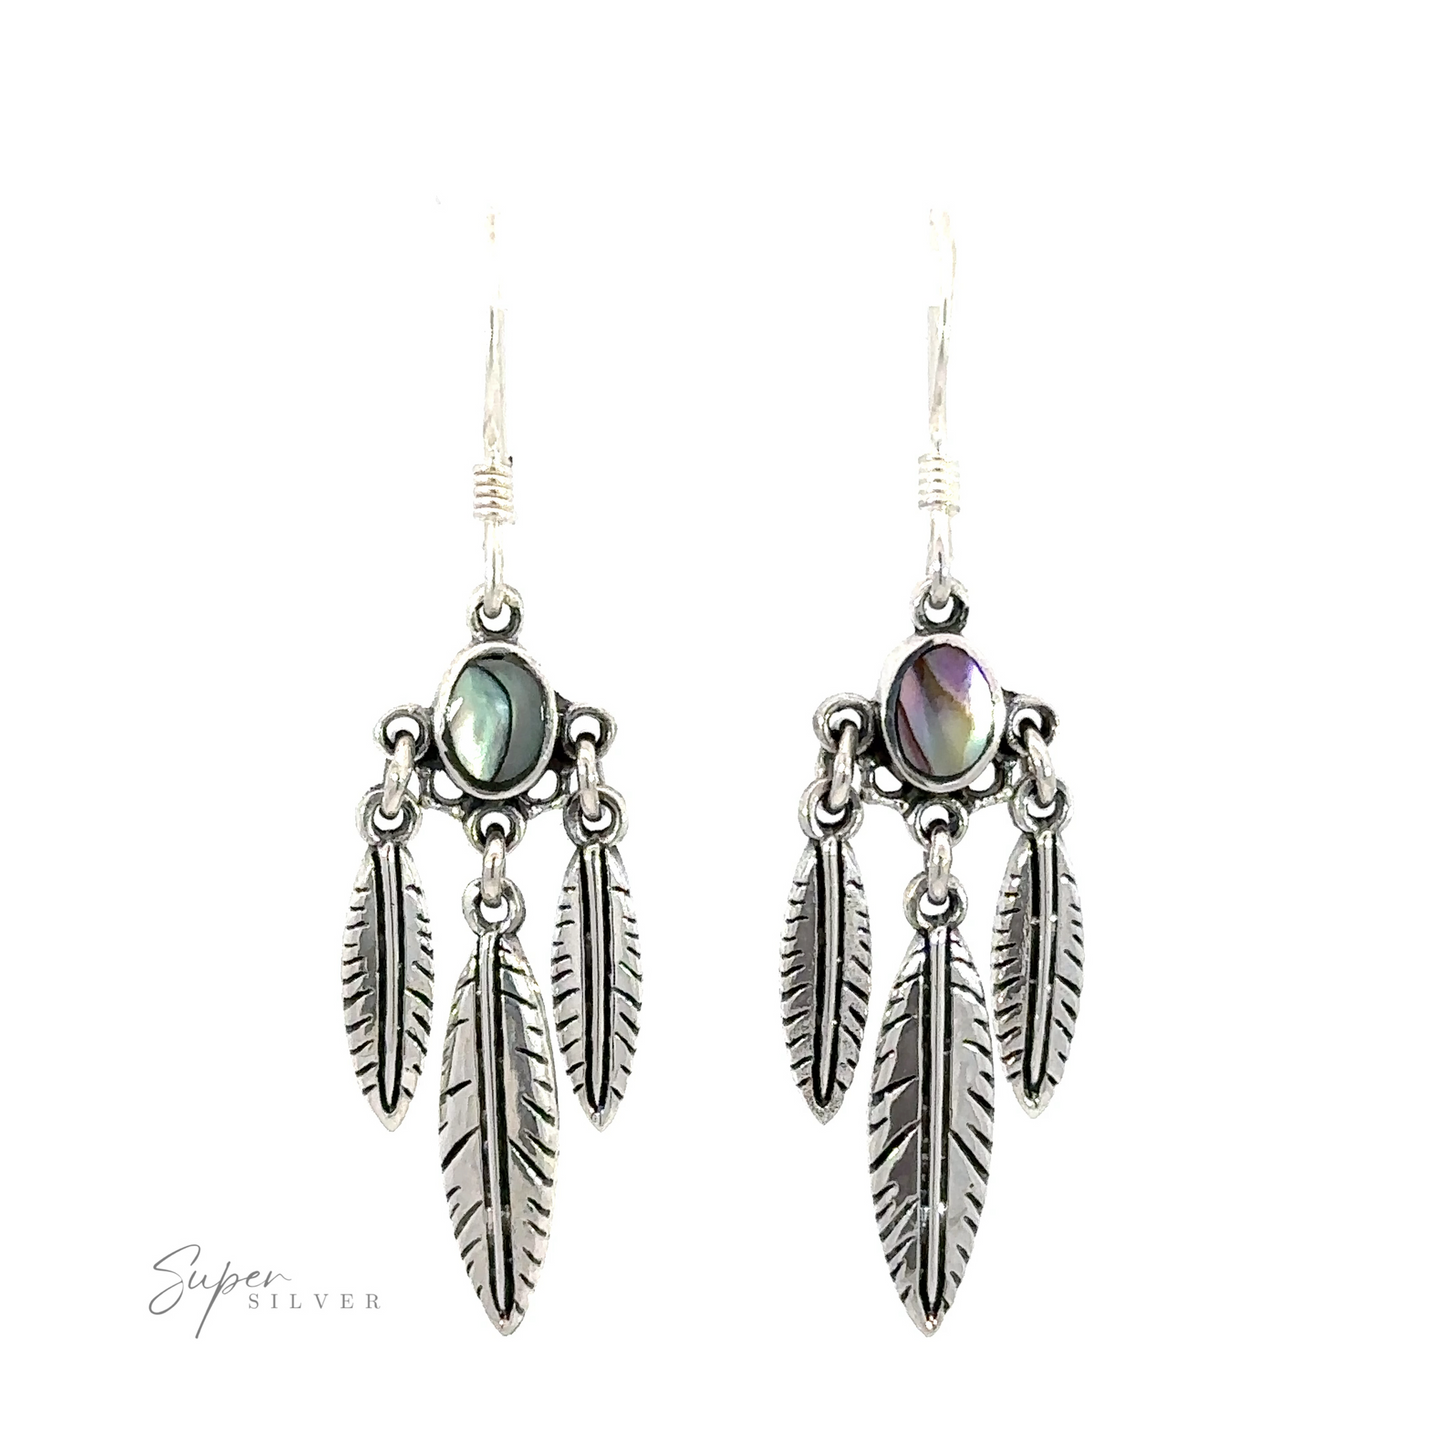 A pair of Western Inspired Earrings with Feather Dangles and Inlay Stones.